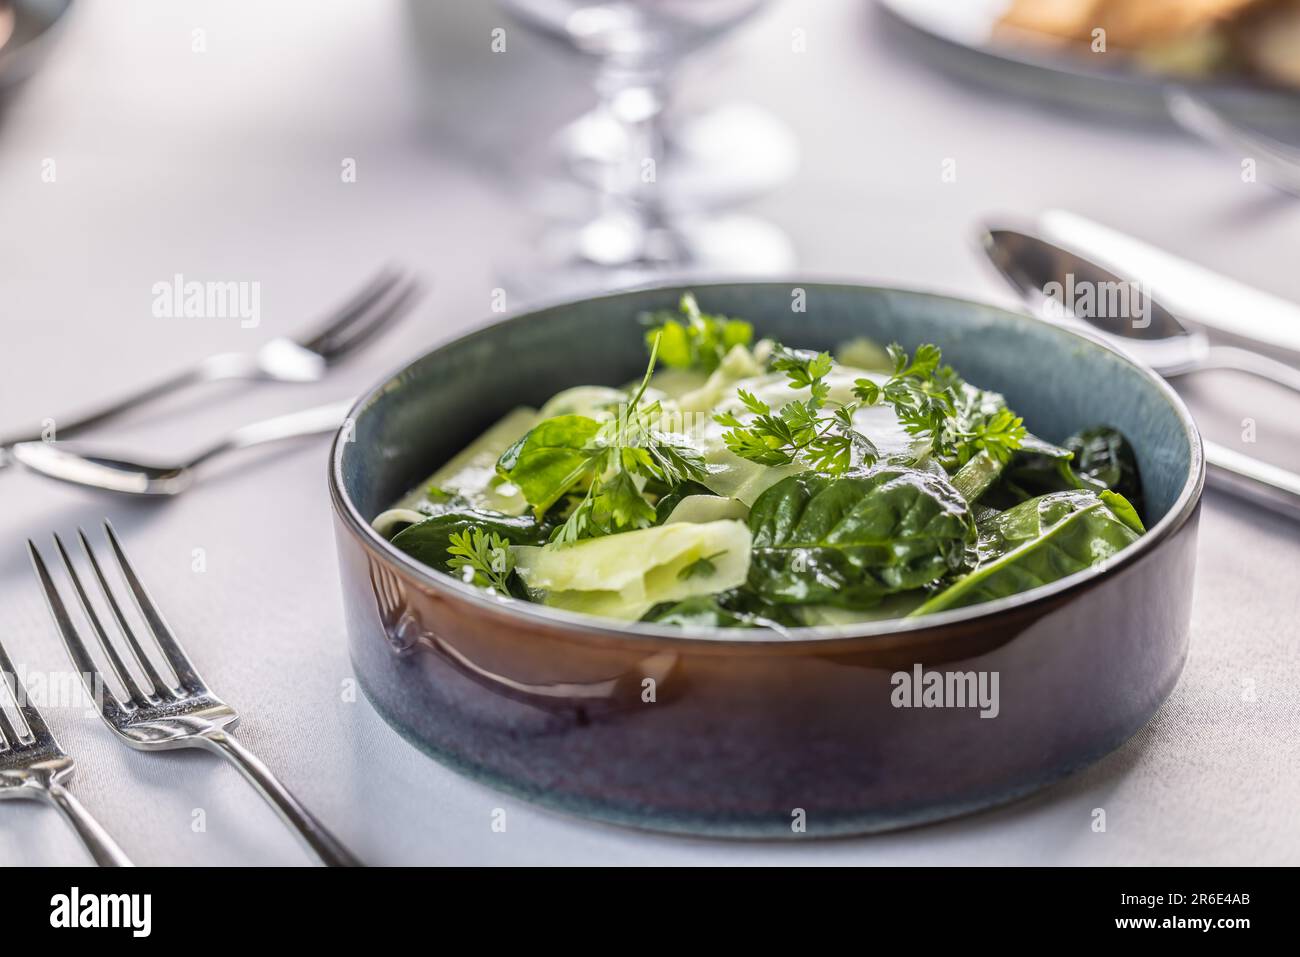 Kohlrabi and spinach leaves salad in a dark bowl in the restaurant. Stock Photo